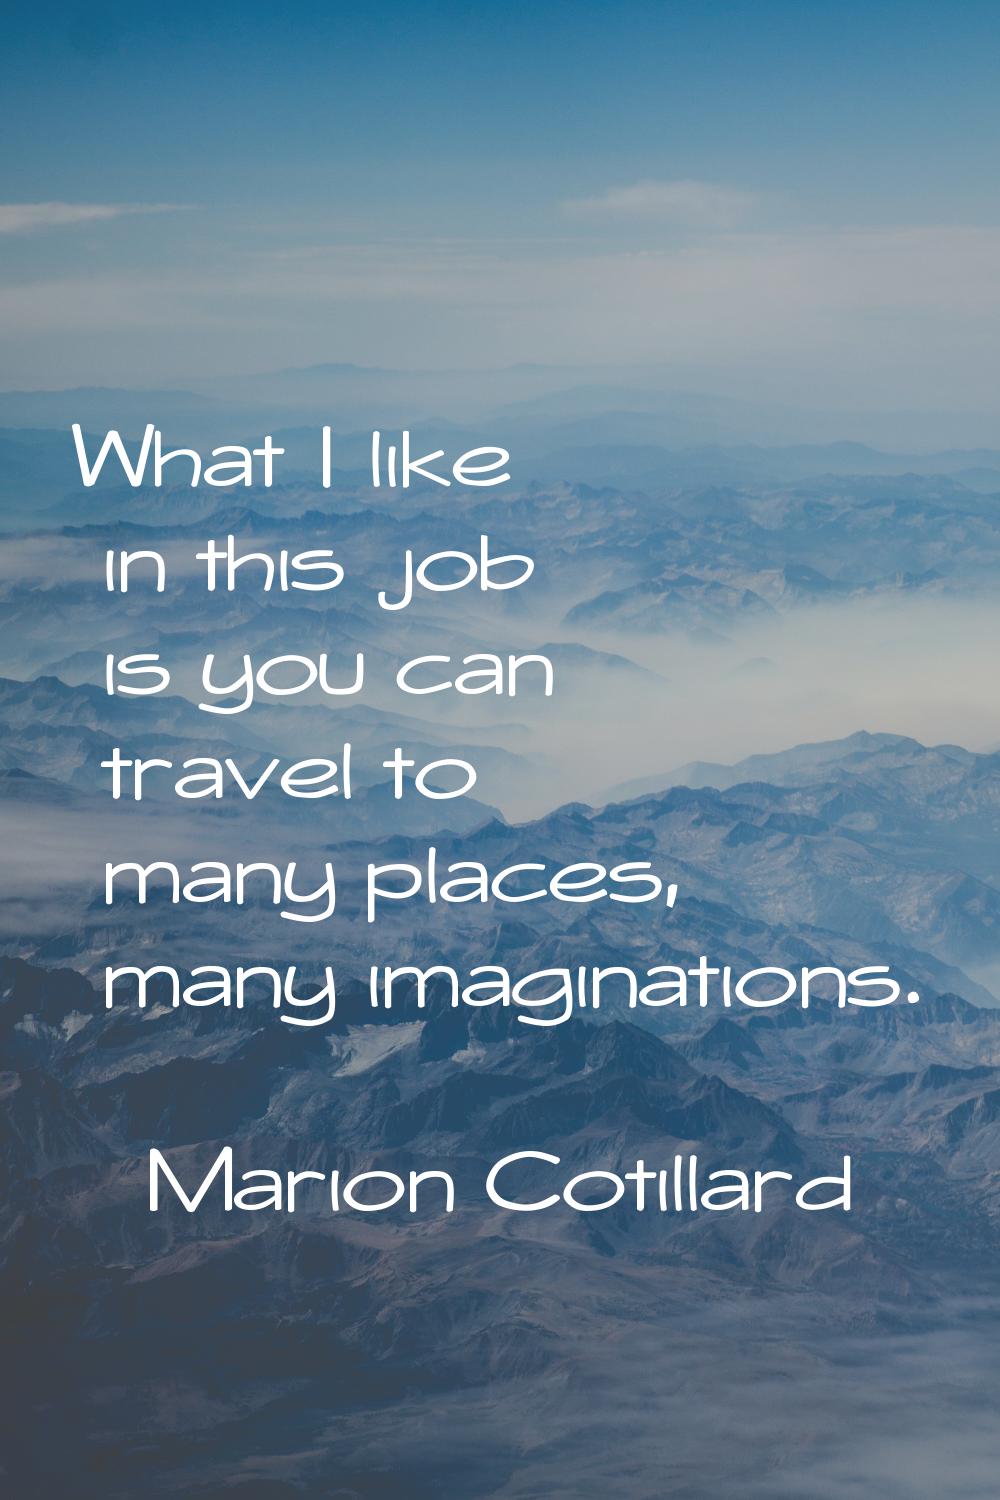 What I like in this job is you can travel to many places, many imaginations.